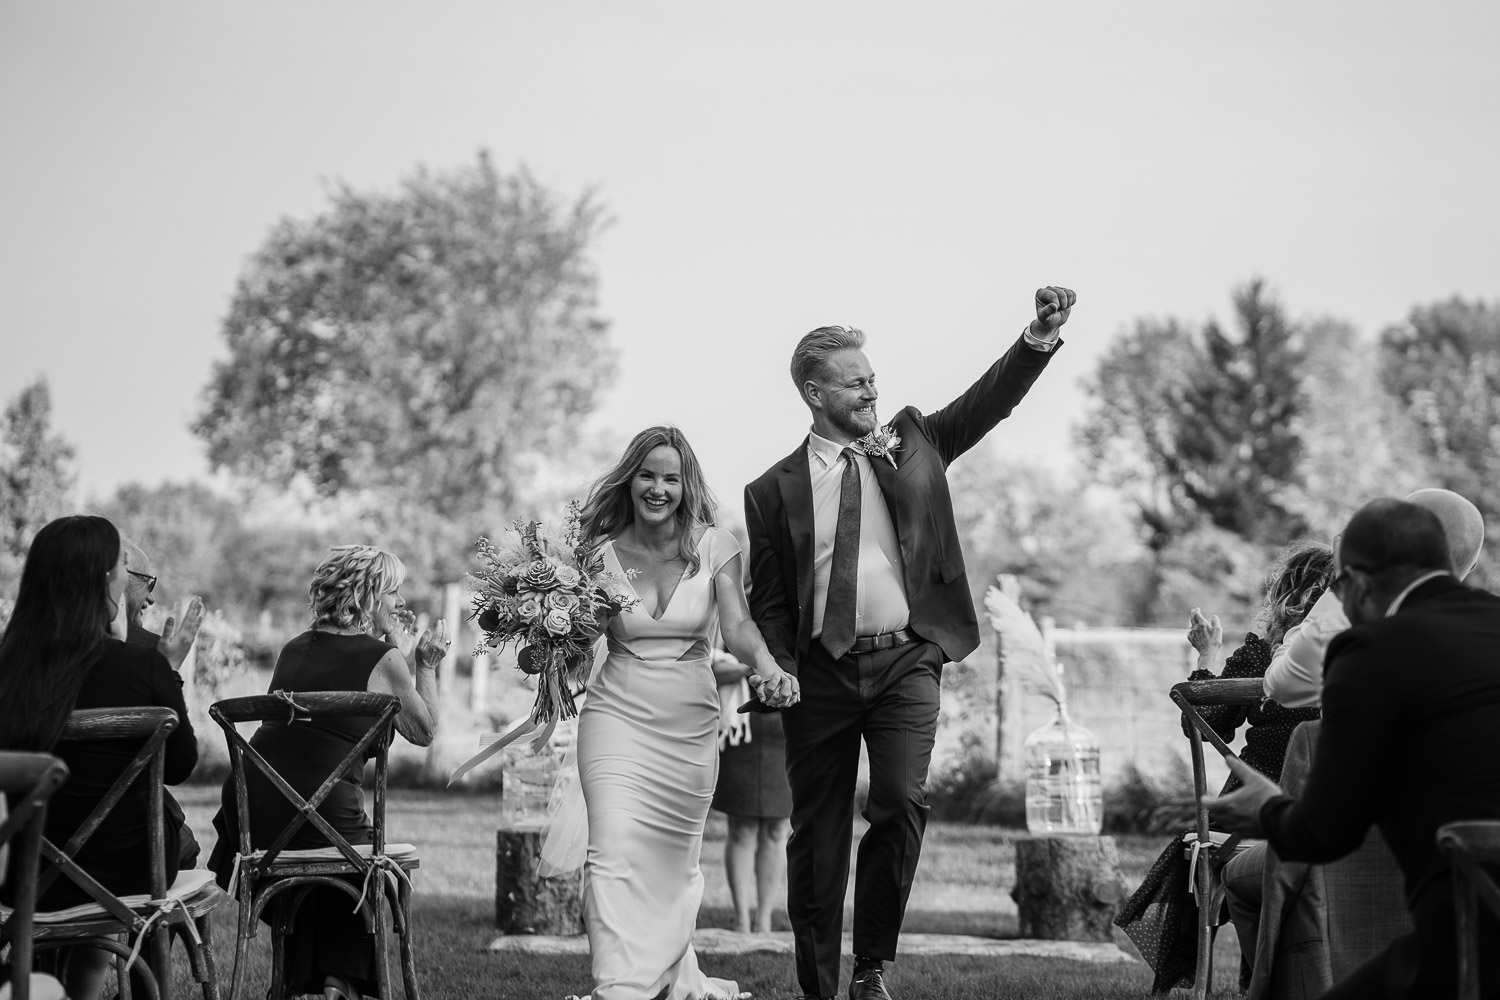 Happy Bride and groom go down the aisle together while groom fist pumps the air